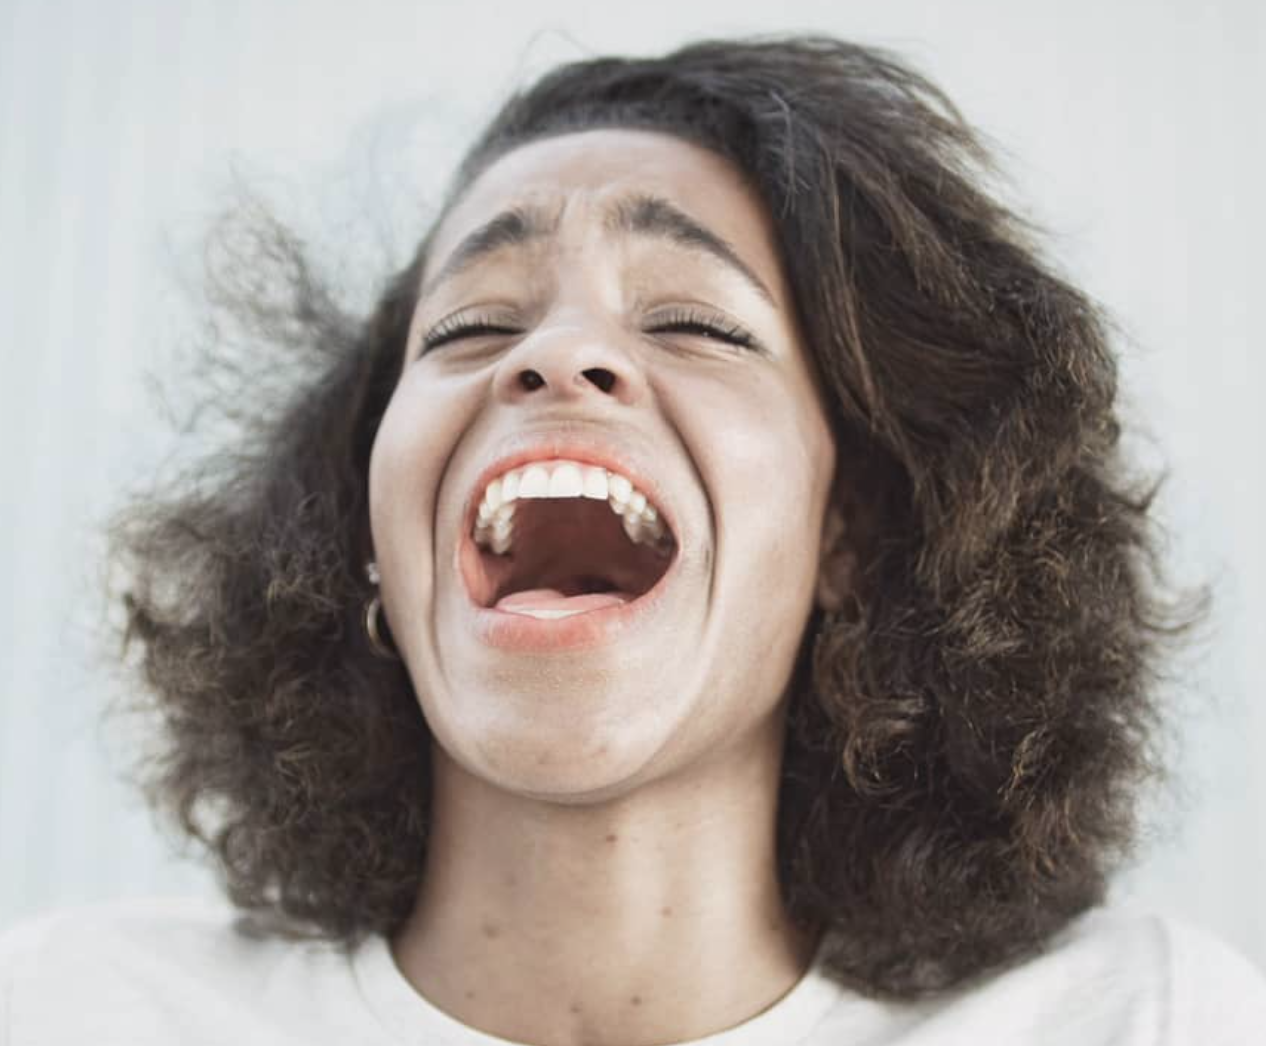 Fine art picture showing a laughing young woman